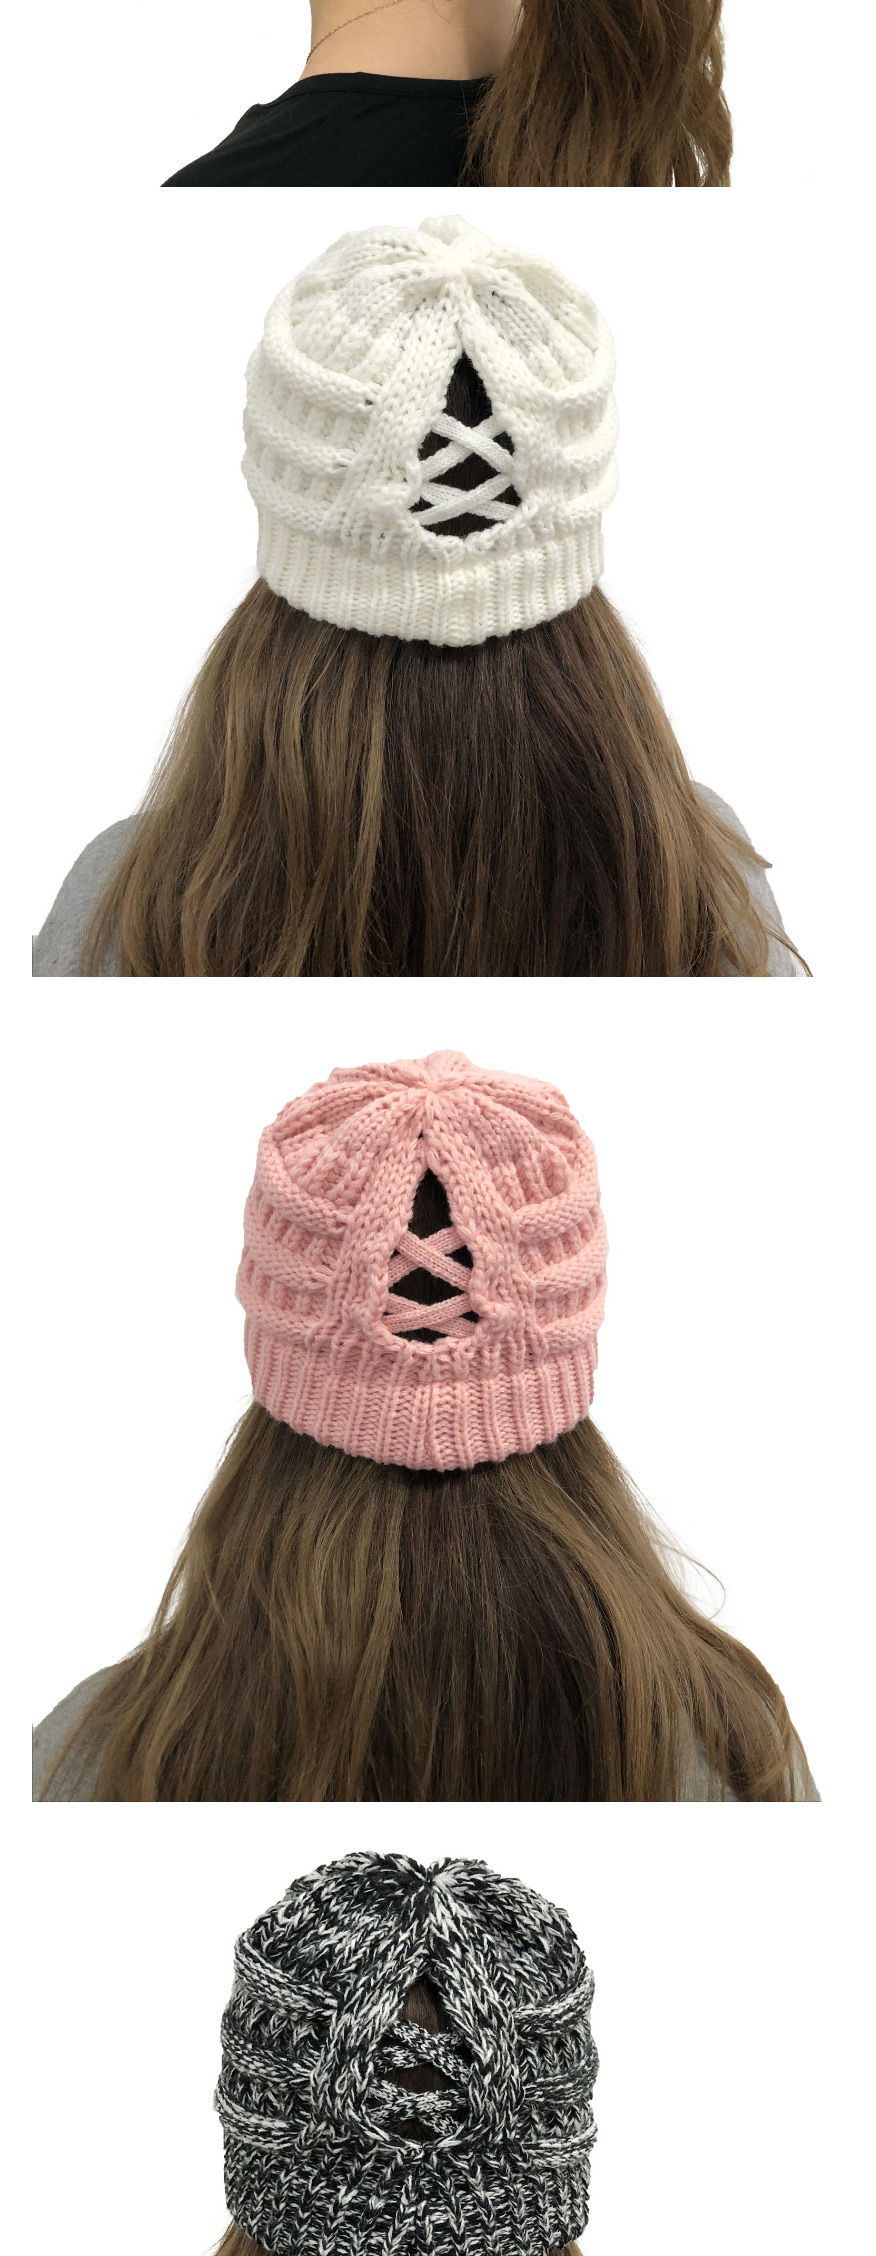 Fashion Claret Button Detachable Cross-back Ponytail Knitted Hat,Knitting Wool Hats